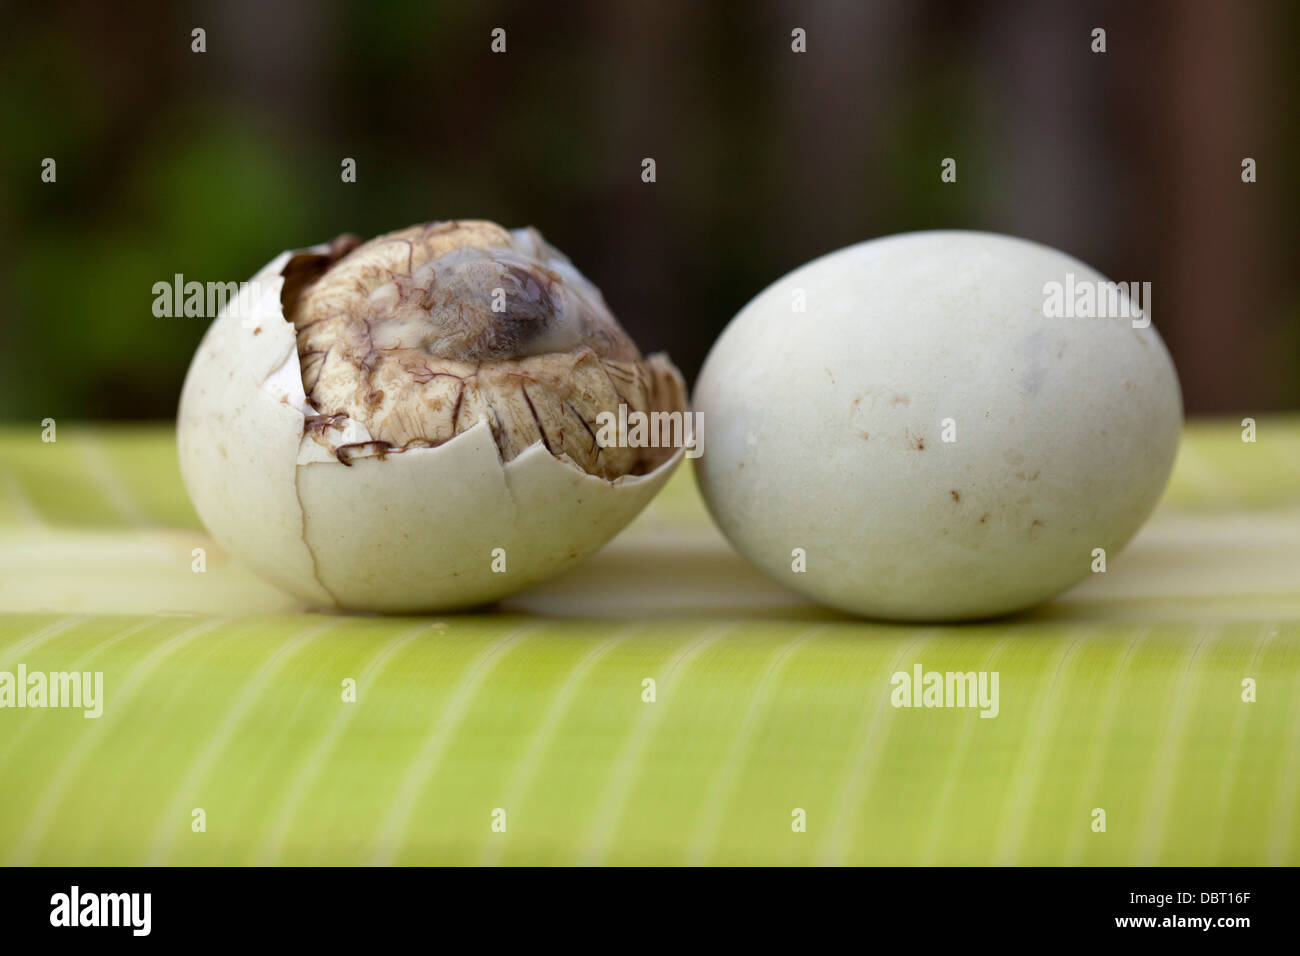 A partially open balut, or fertilized duck egg, pictured alongside a whole one in Oriental Mindoro, Philippines. Stock Photo